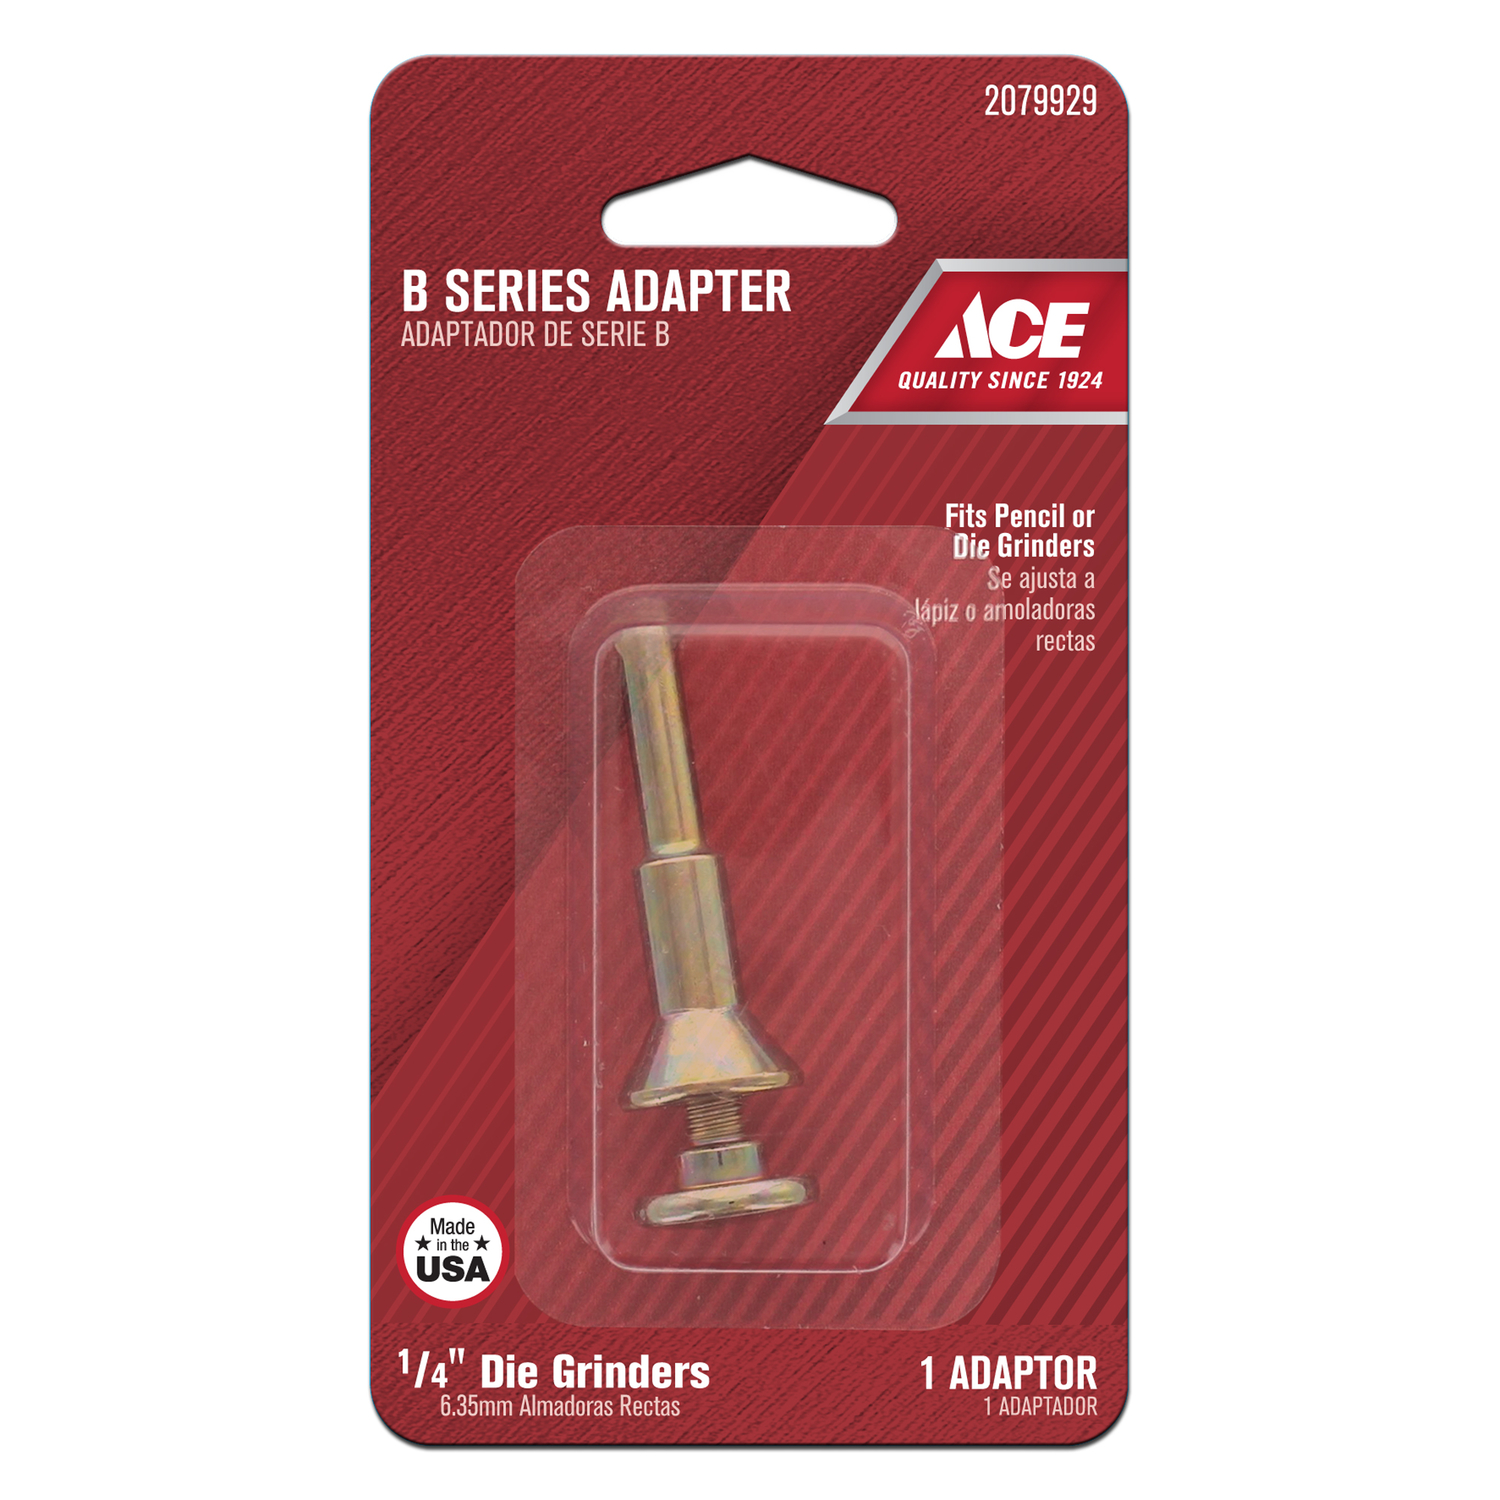 UPC 082901041771 product image for Ace(r) Die Grinder Cutoff Blade Adapter | upcitemdb.com